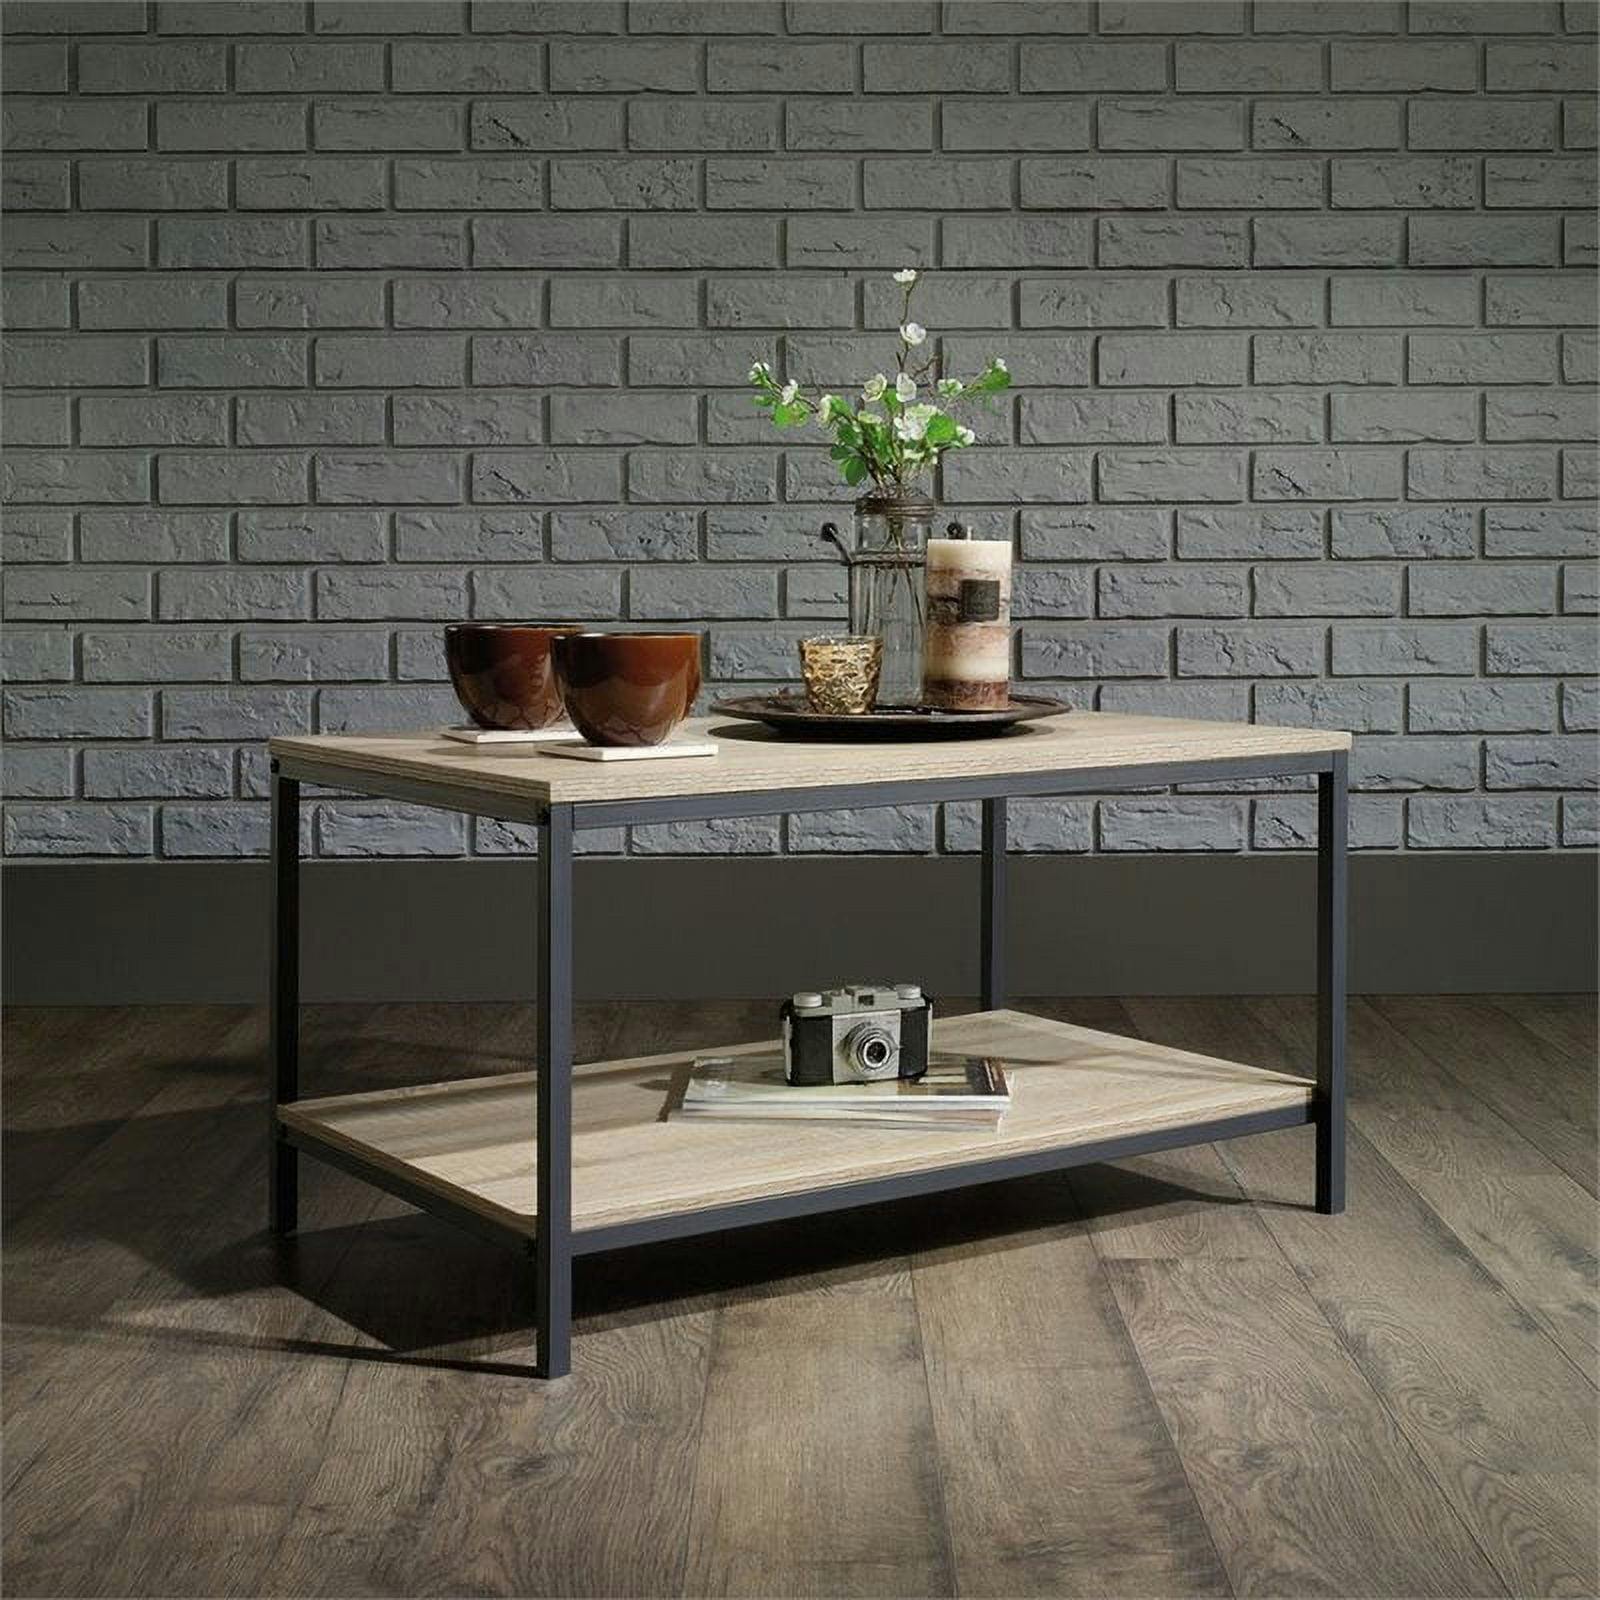 Charter Oak Industrial Chic Rectangular Coffee Table with Metal Frame